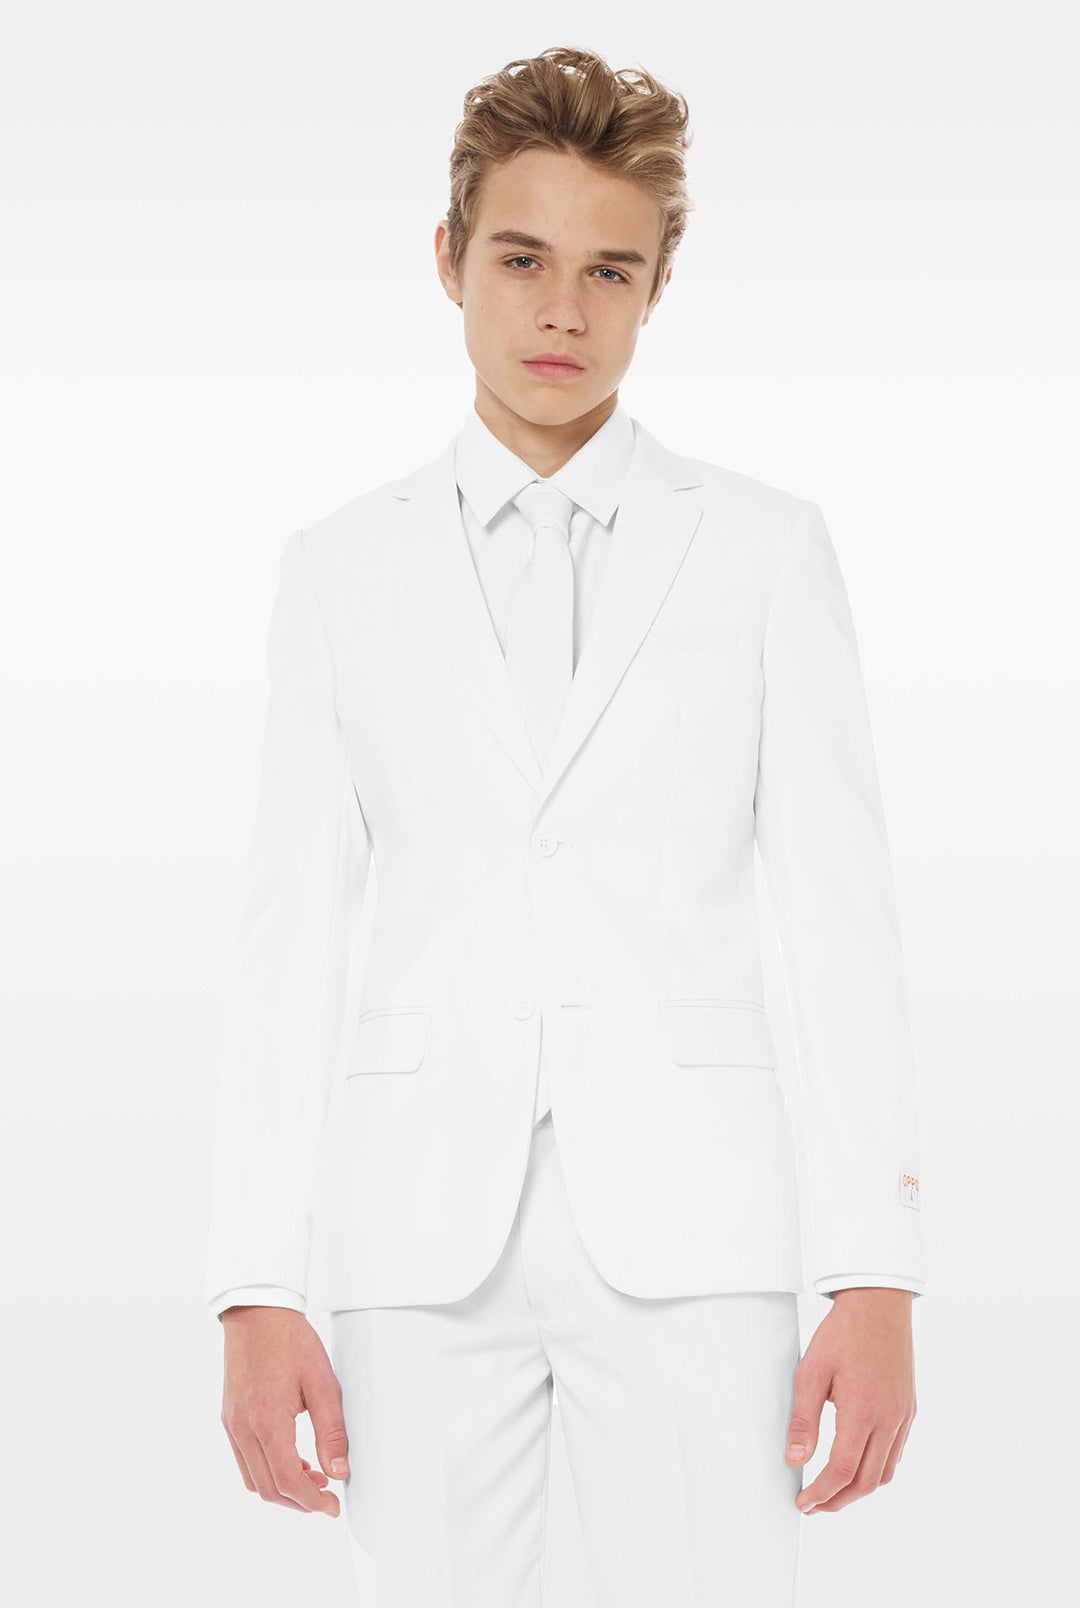 White Wedding Suits for Man | Top of the Best White Wedding Suits for Groom  | Blazers and Trousers